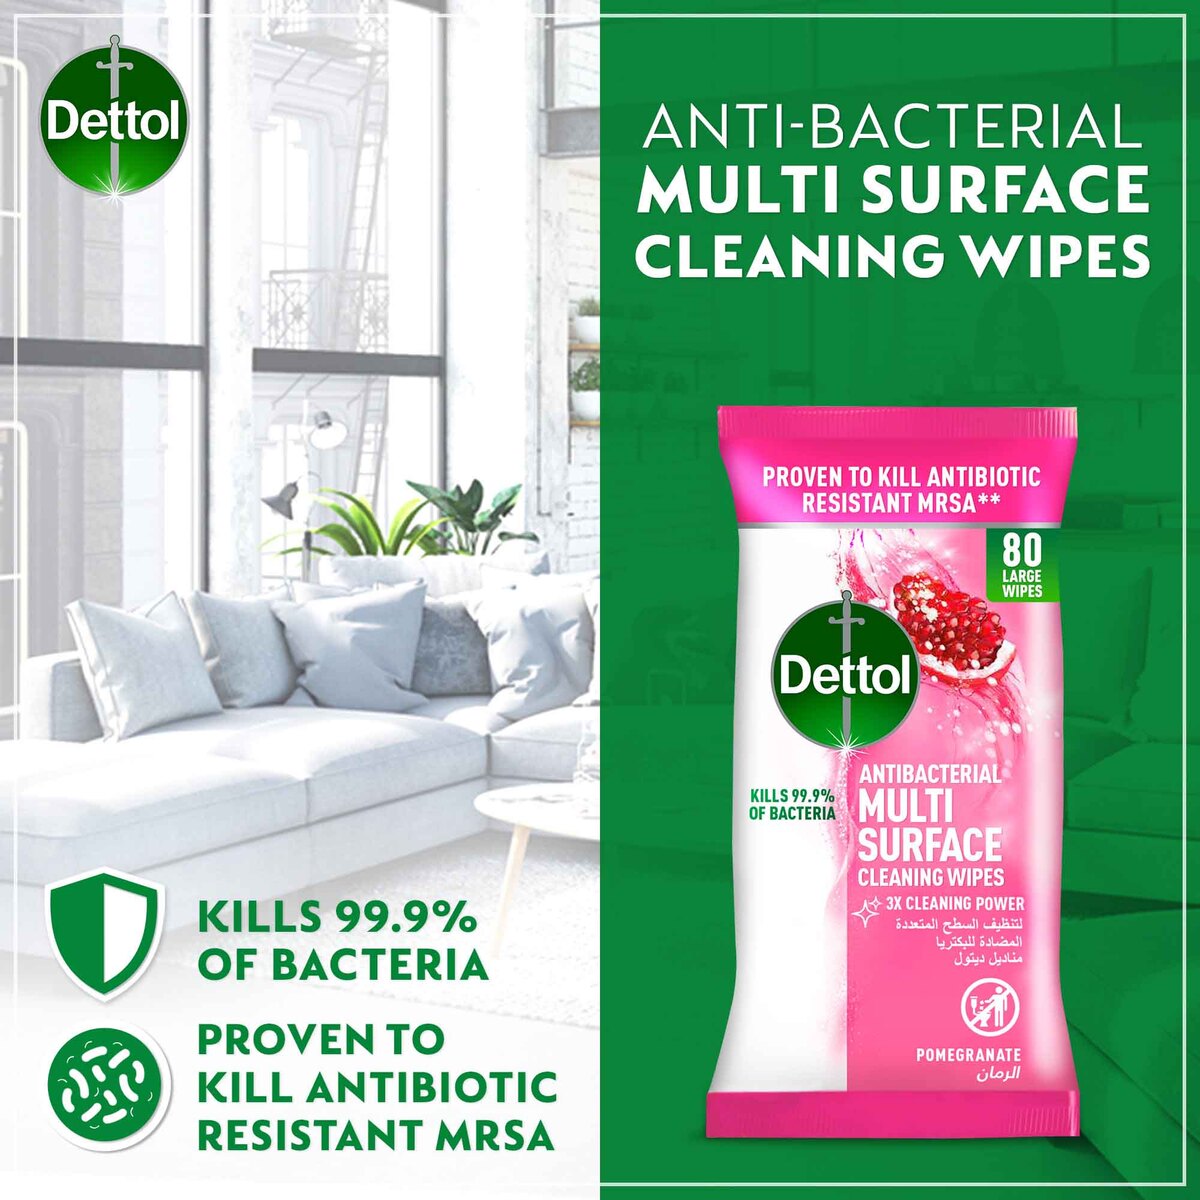 Dettol Pomegranate Antibacterial Multi Surface Cleaning Wipes Large 80 pcs